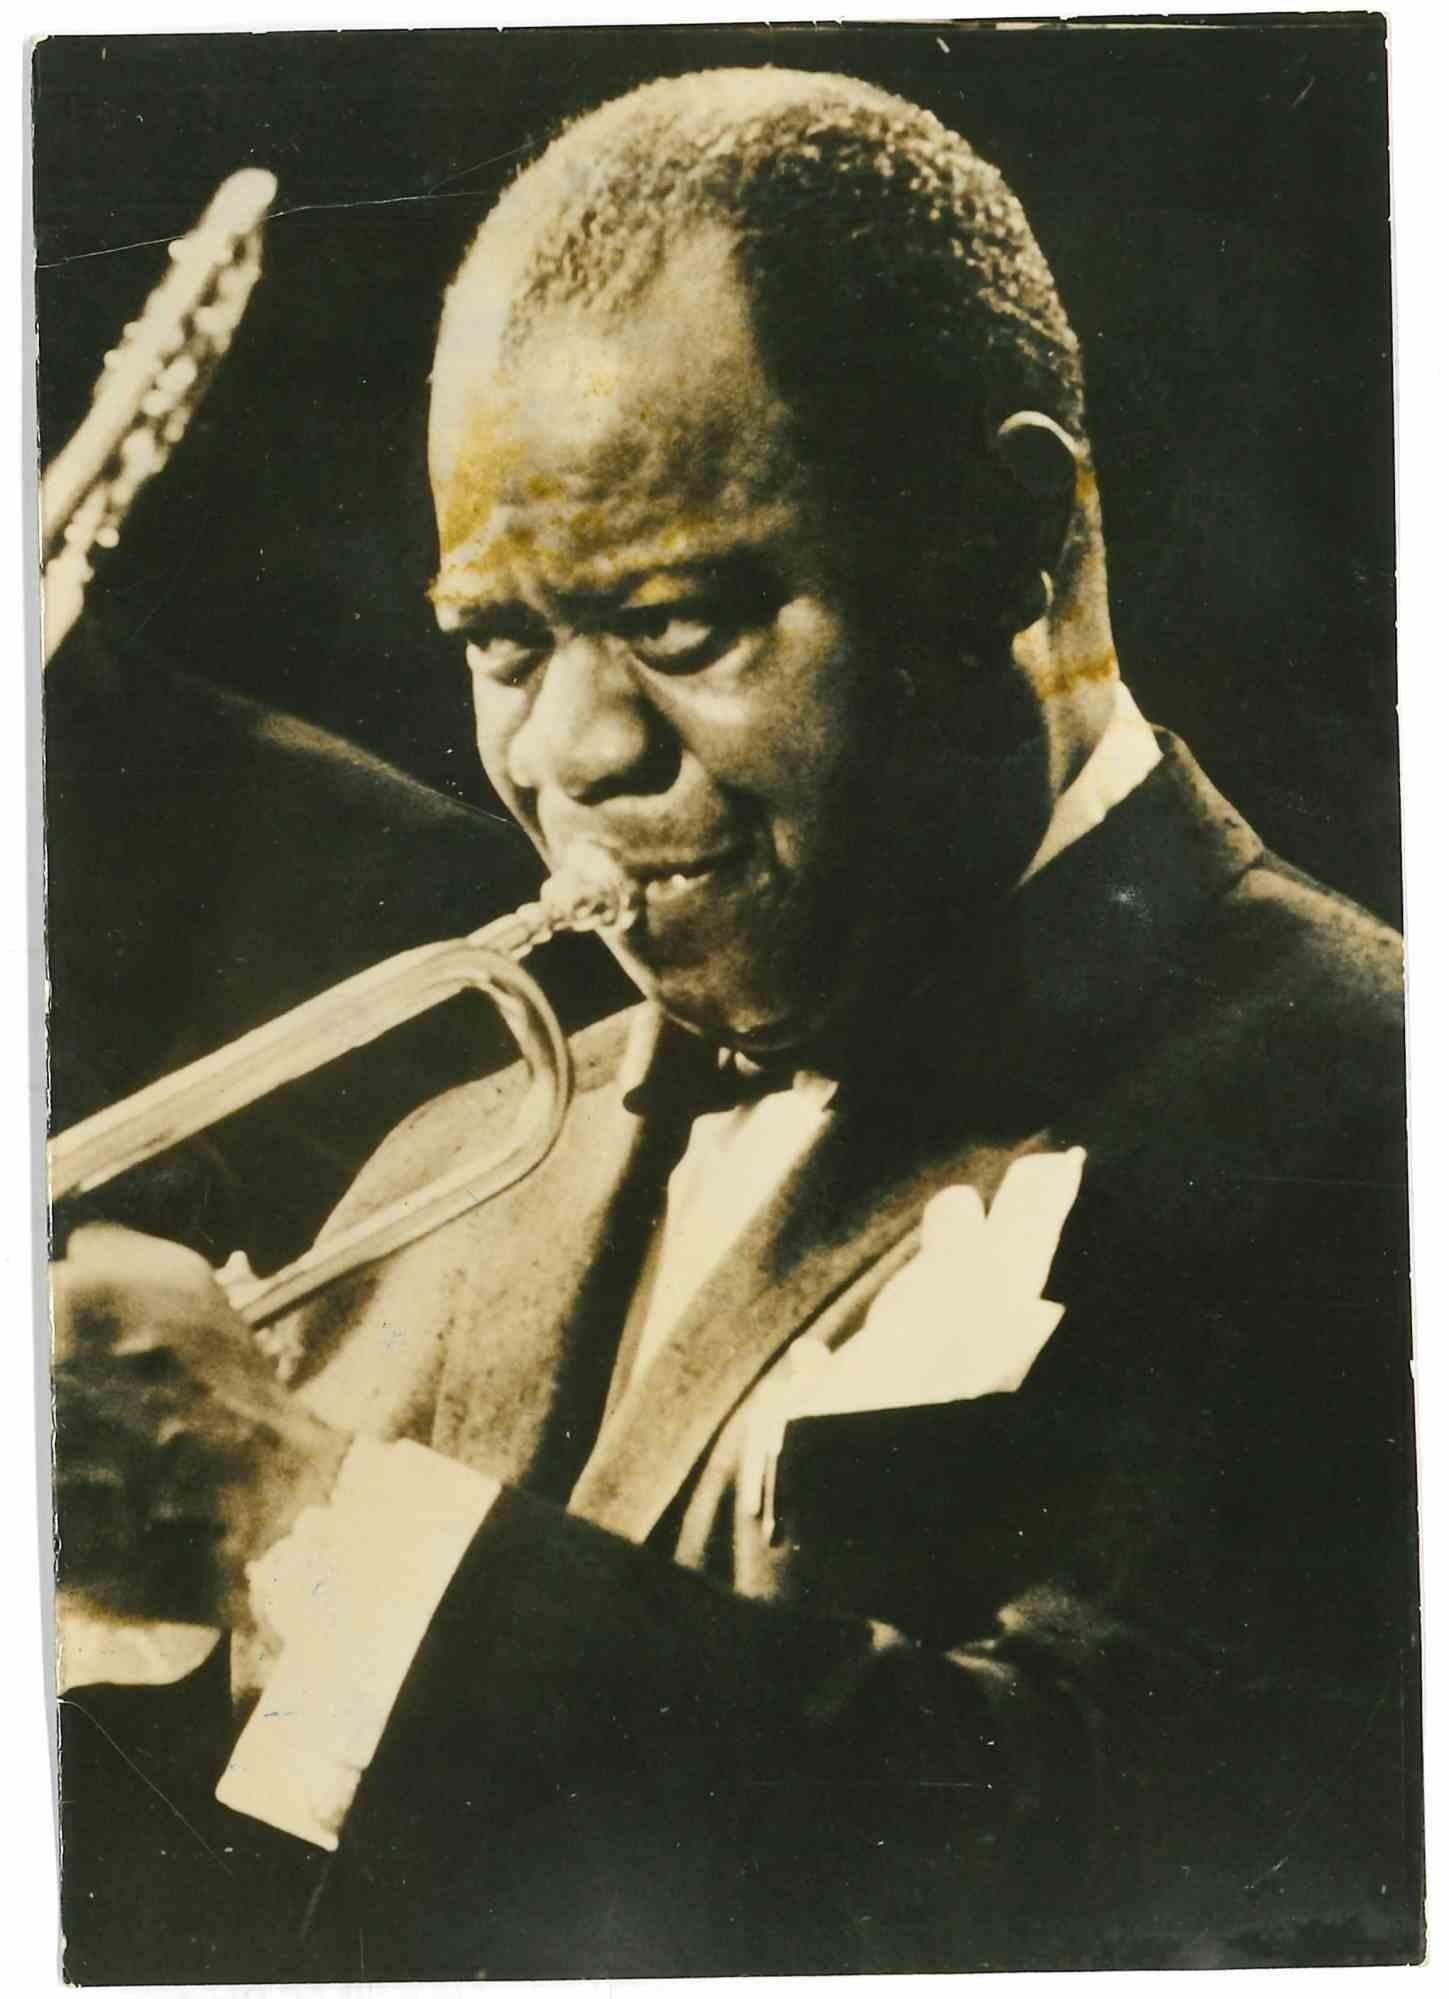  Louis Armstrong - Photo - années 1960